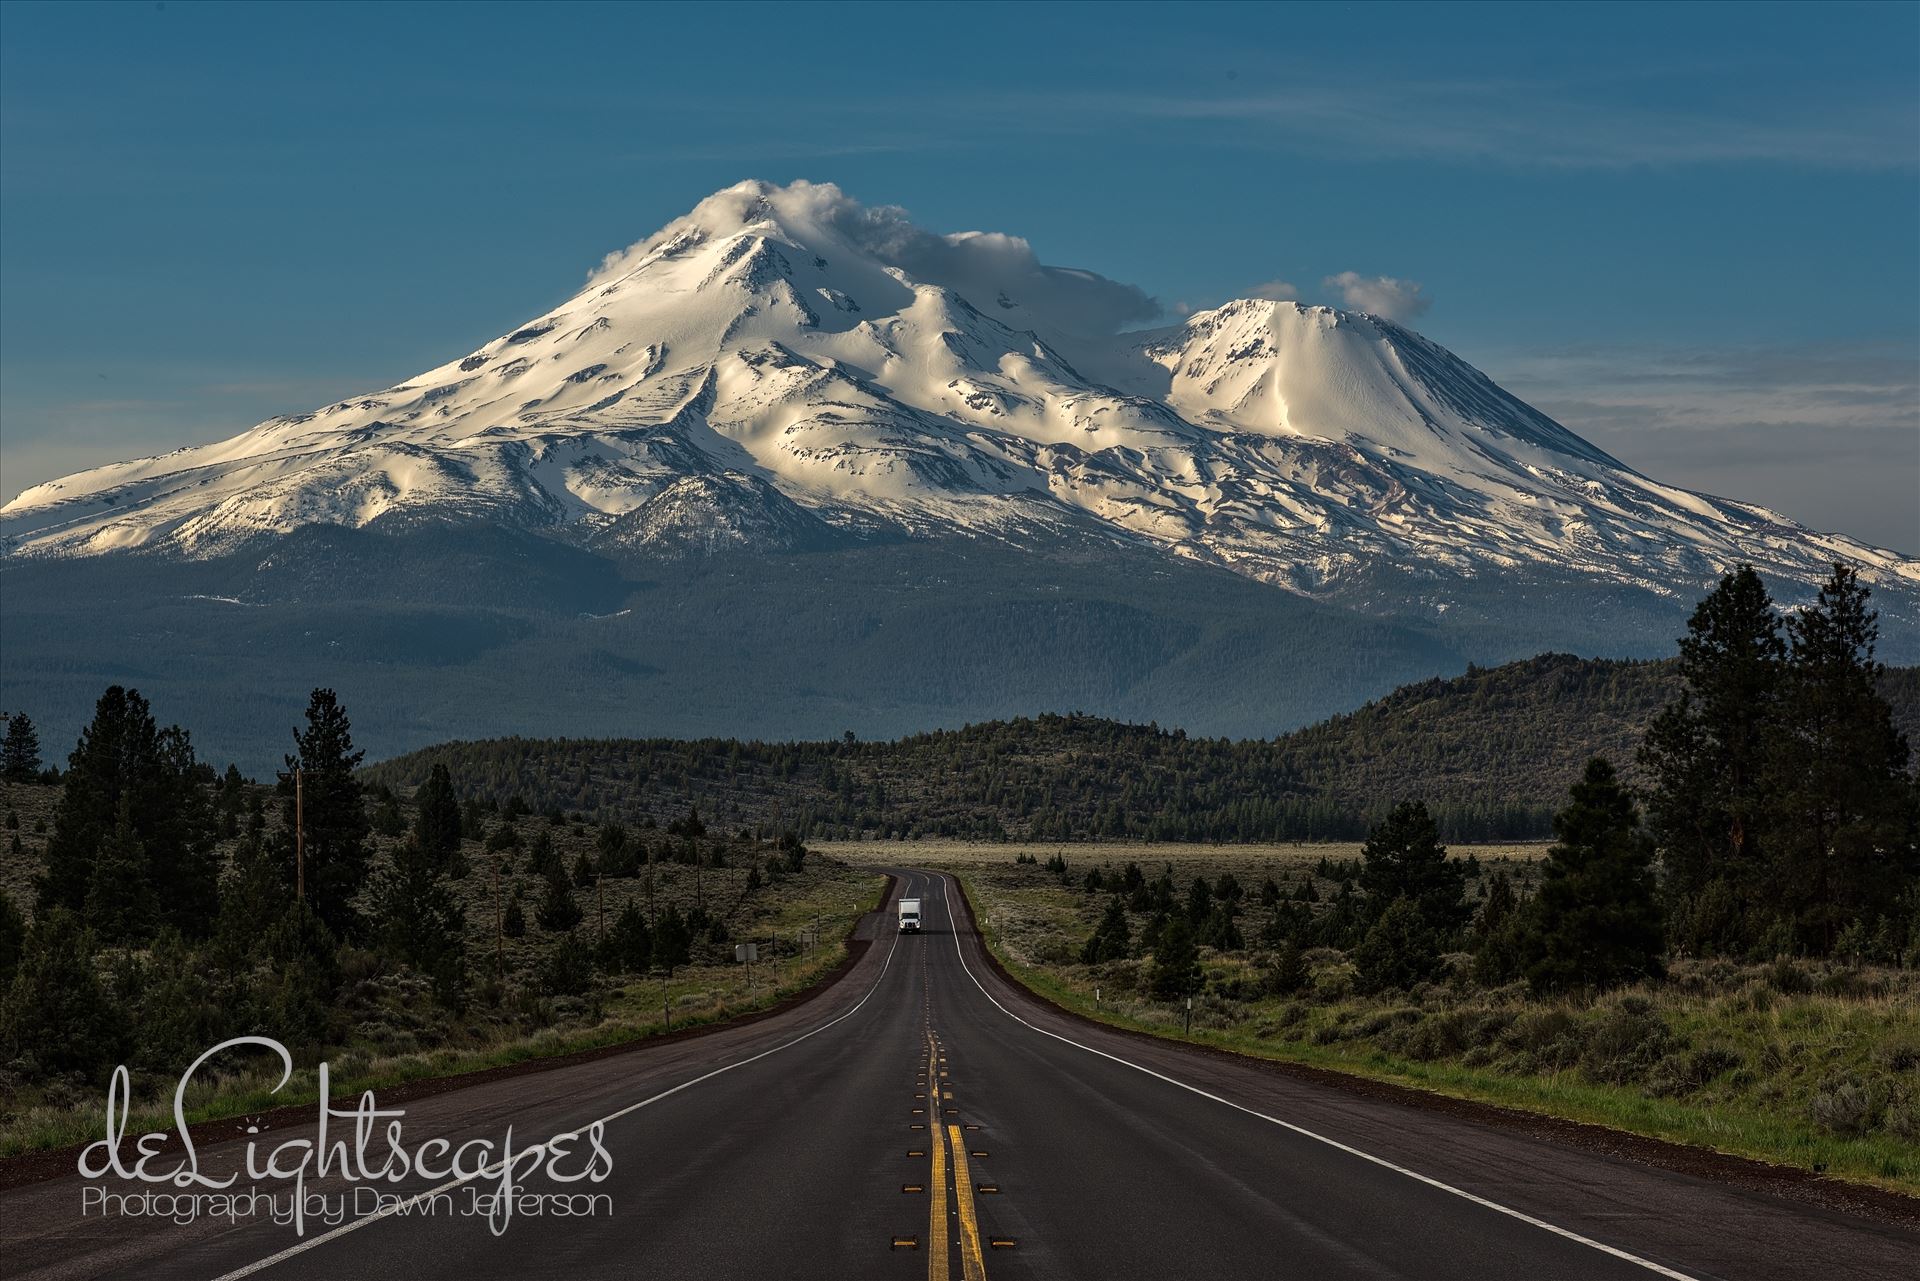 Caution: Volcano Ahead - Mt Shasta is the 5th highest peak in California. It rises abruptly to 14,179 ft. Most prominently seen are the main summit and the satellite cone known as Shastina. by Dawn Jefferson